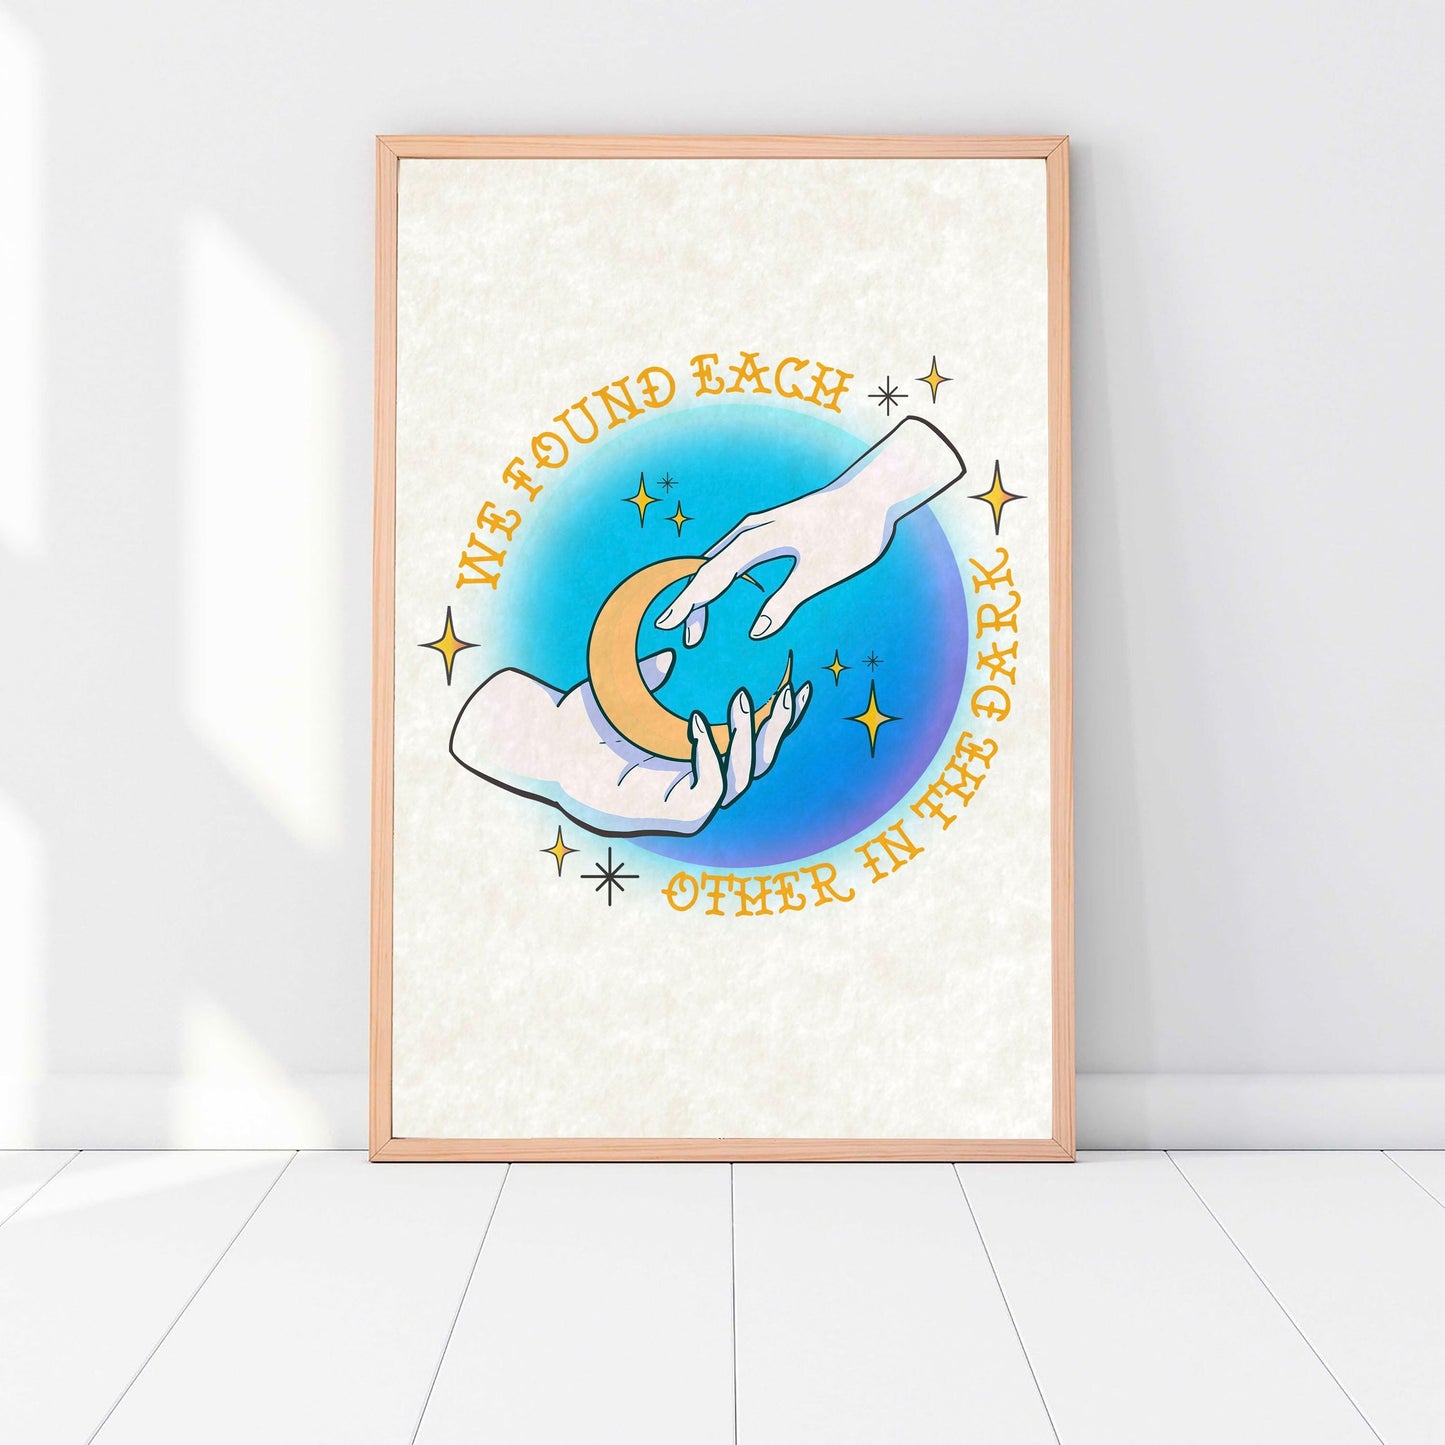 Tattoo Style Art Print - We Found Each Other in the Dark